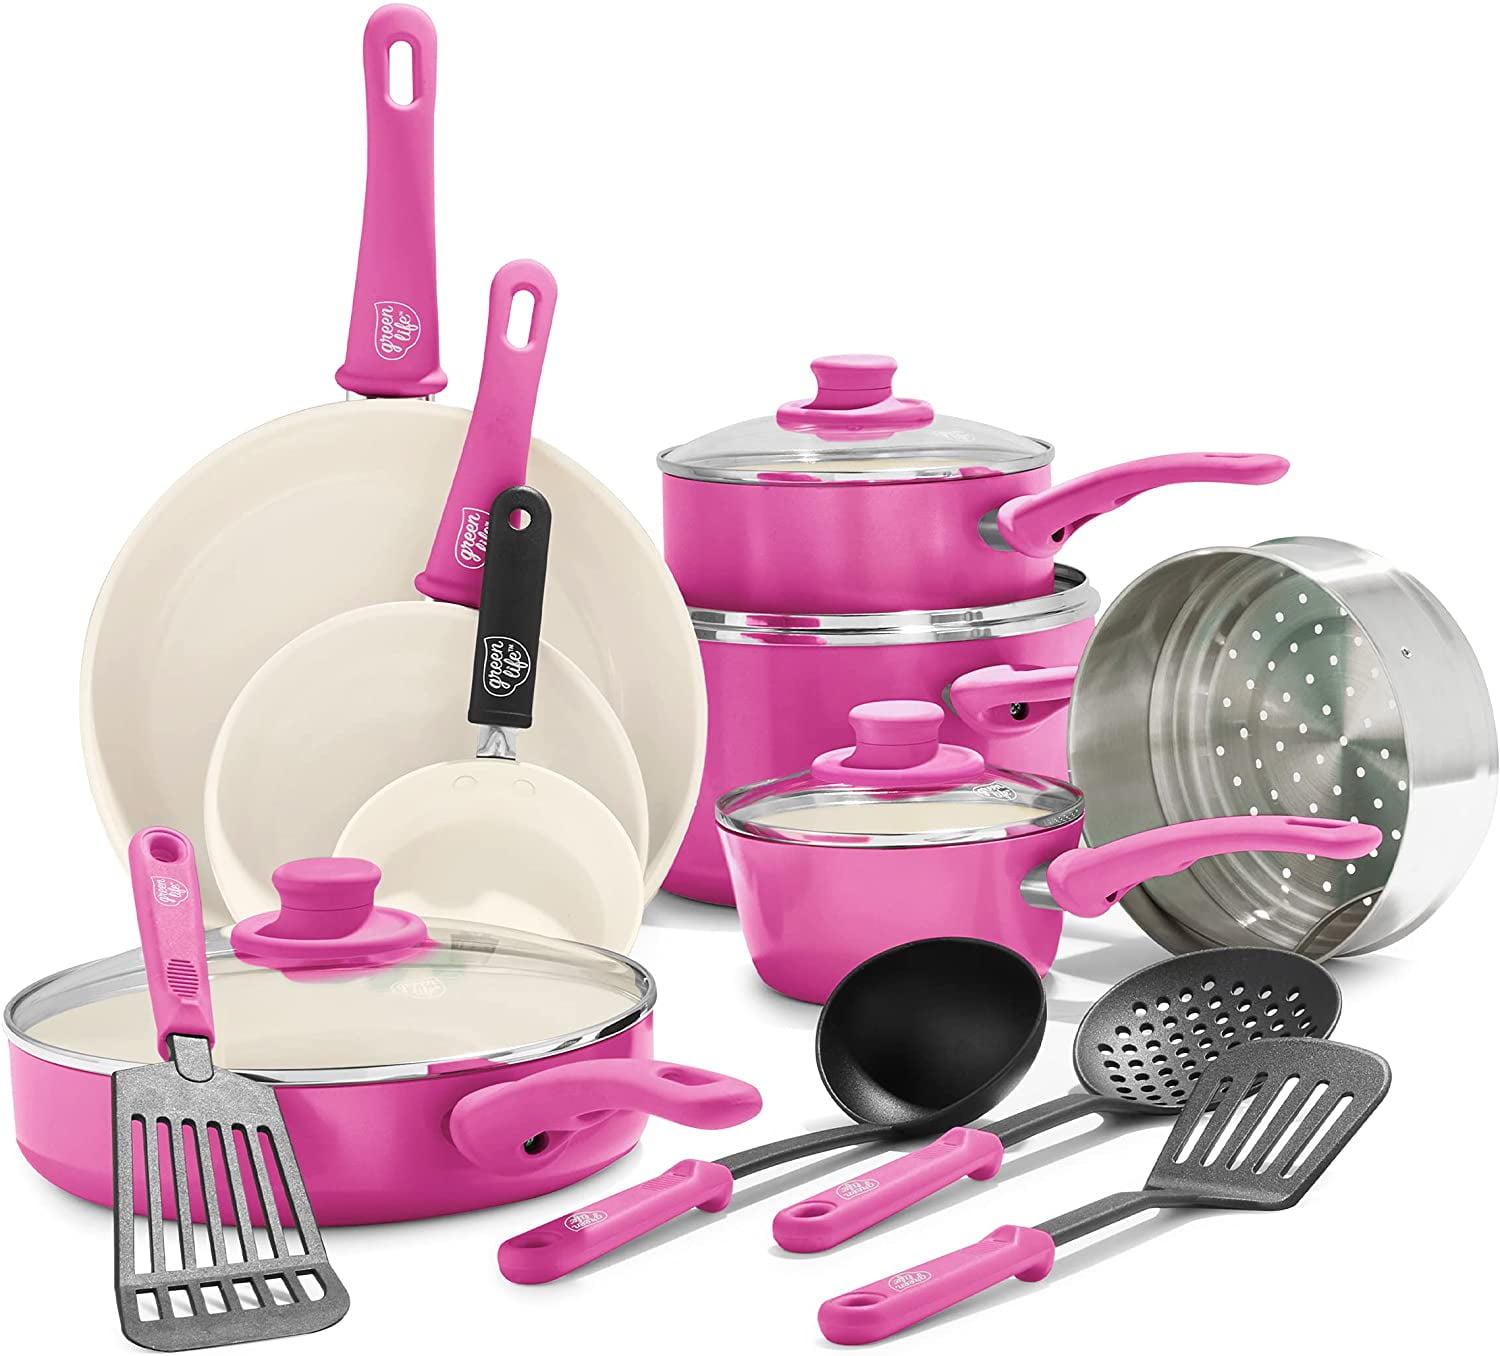 GreenLife Artisan Healthy Ceramic Nonstick, 12-Piece Cookware Set, Stainless Steel Handle Color: Pink CC005650-001